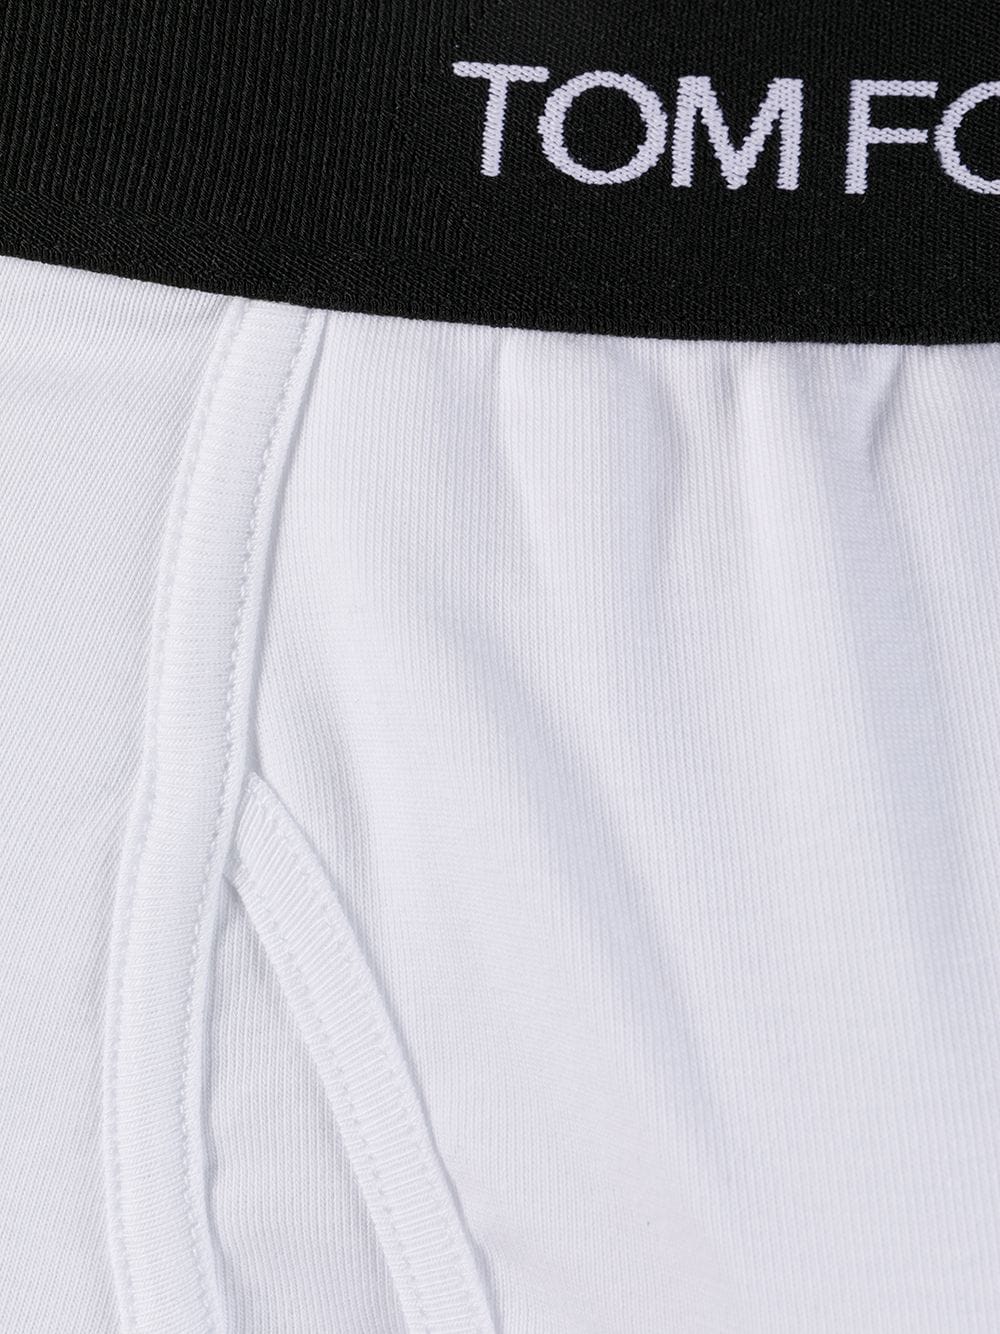 TOM FORD COTTON BOXER